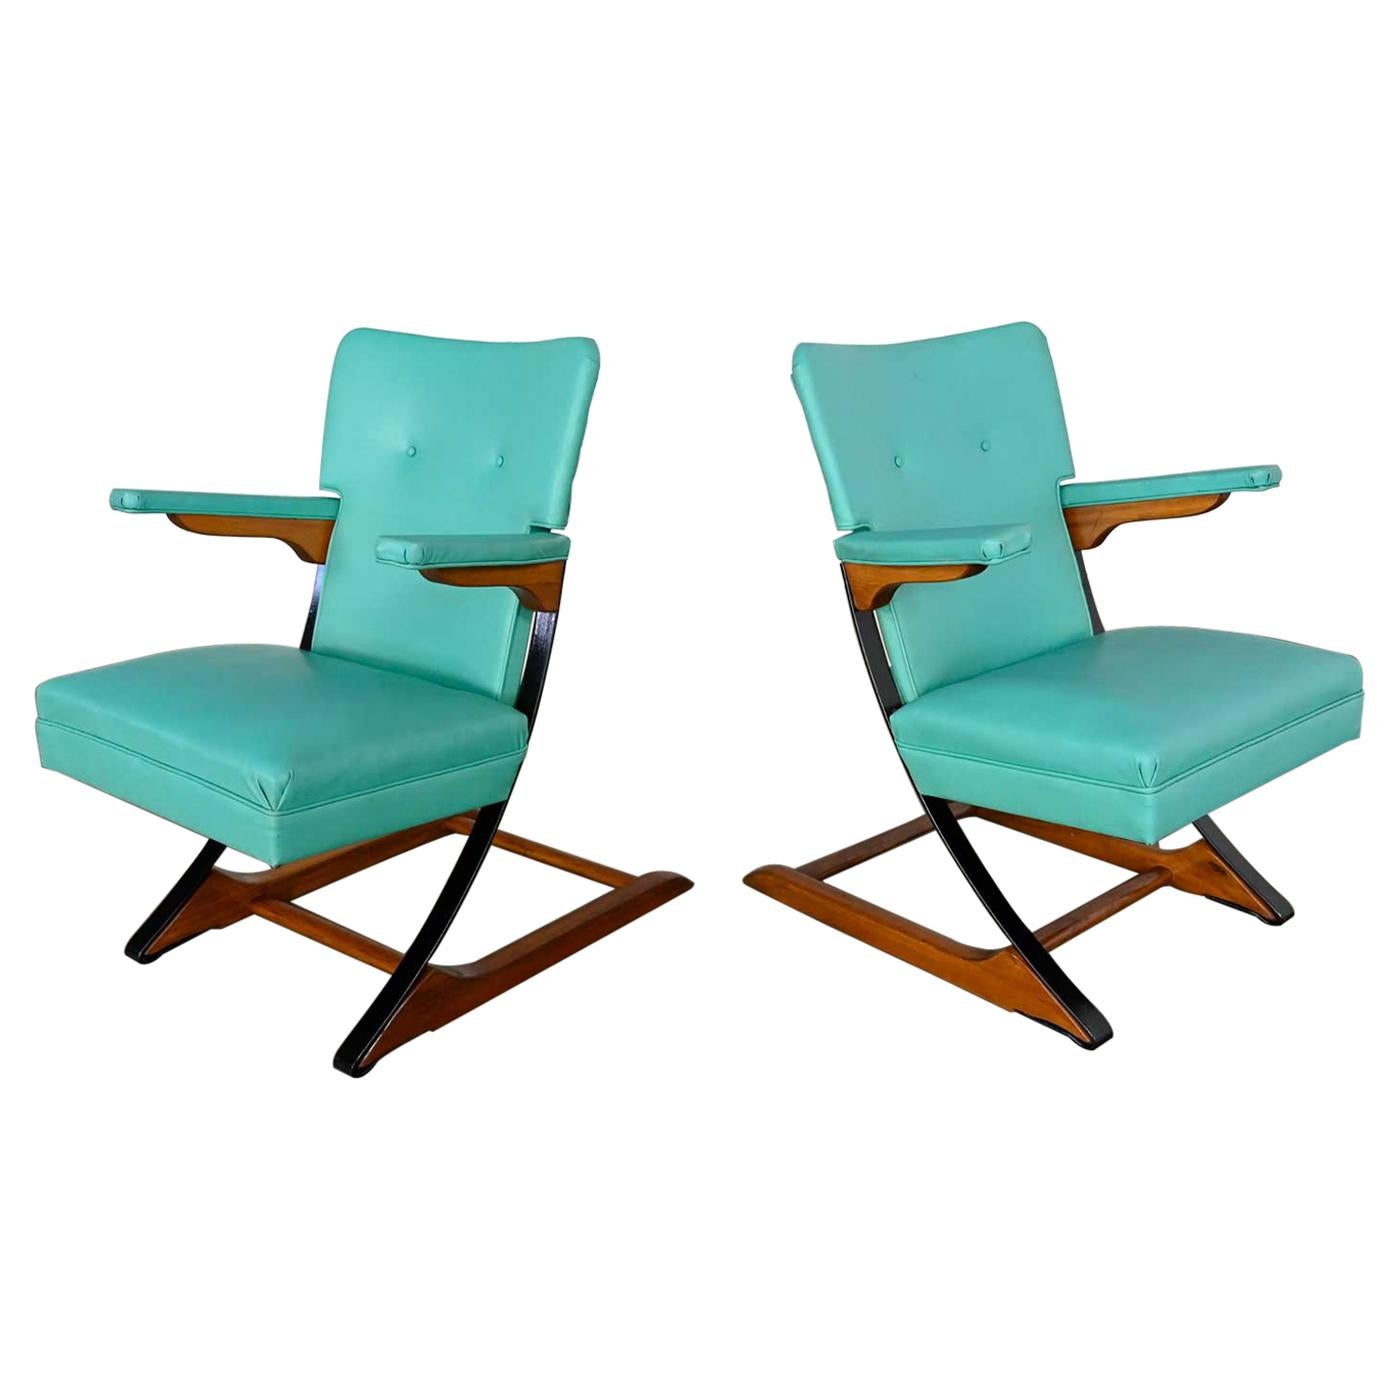 MCM Turquoise Vinyl Faux Leather Spring Rockers Style of McKay and Rock-A-Chair